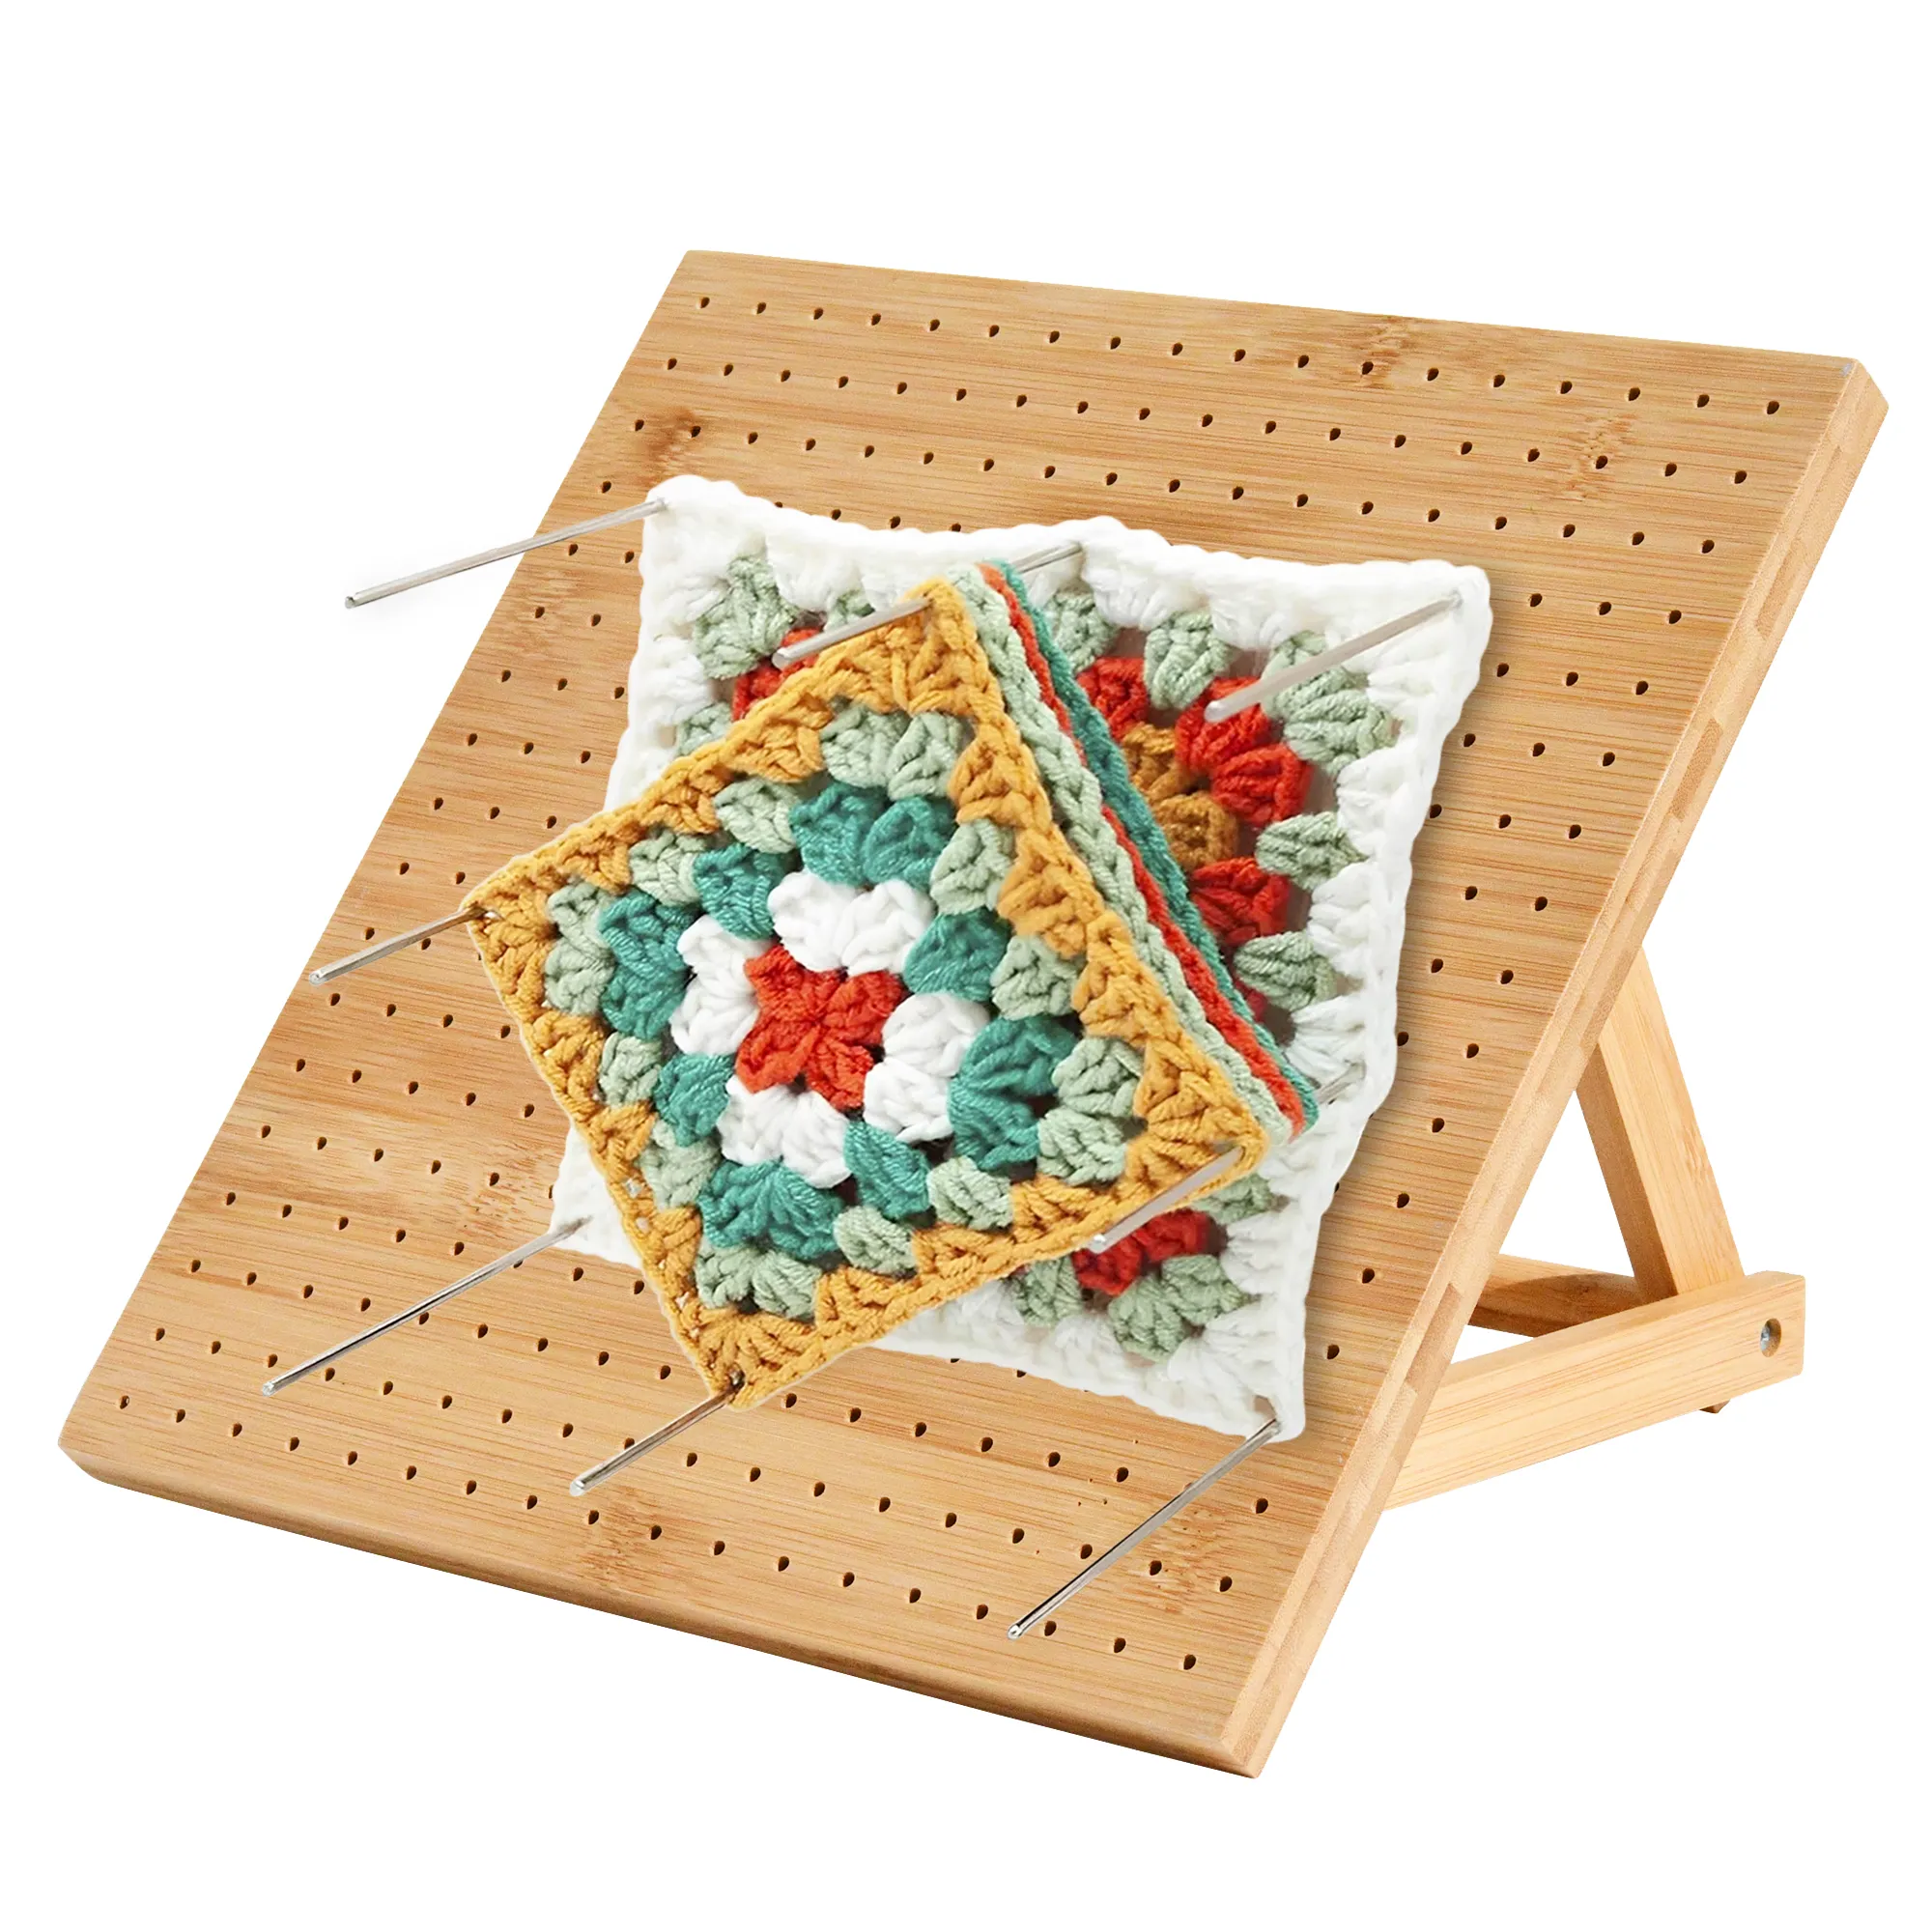 Eco-friendly Expandable Bamboo Wood Blocking Board For Crochet As Gift For Mother